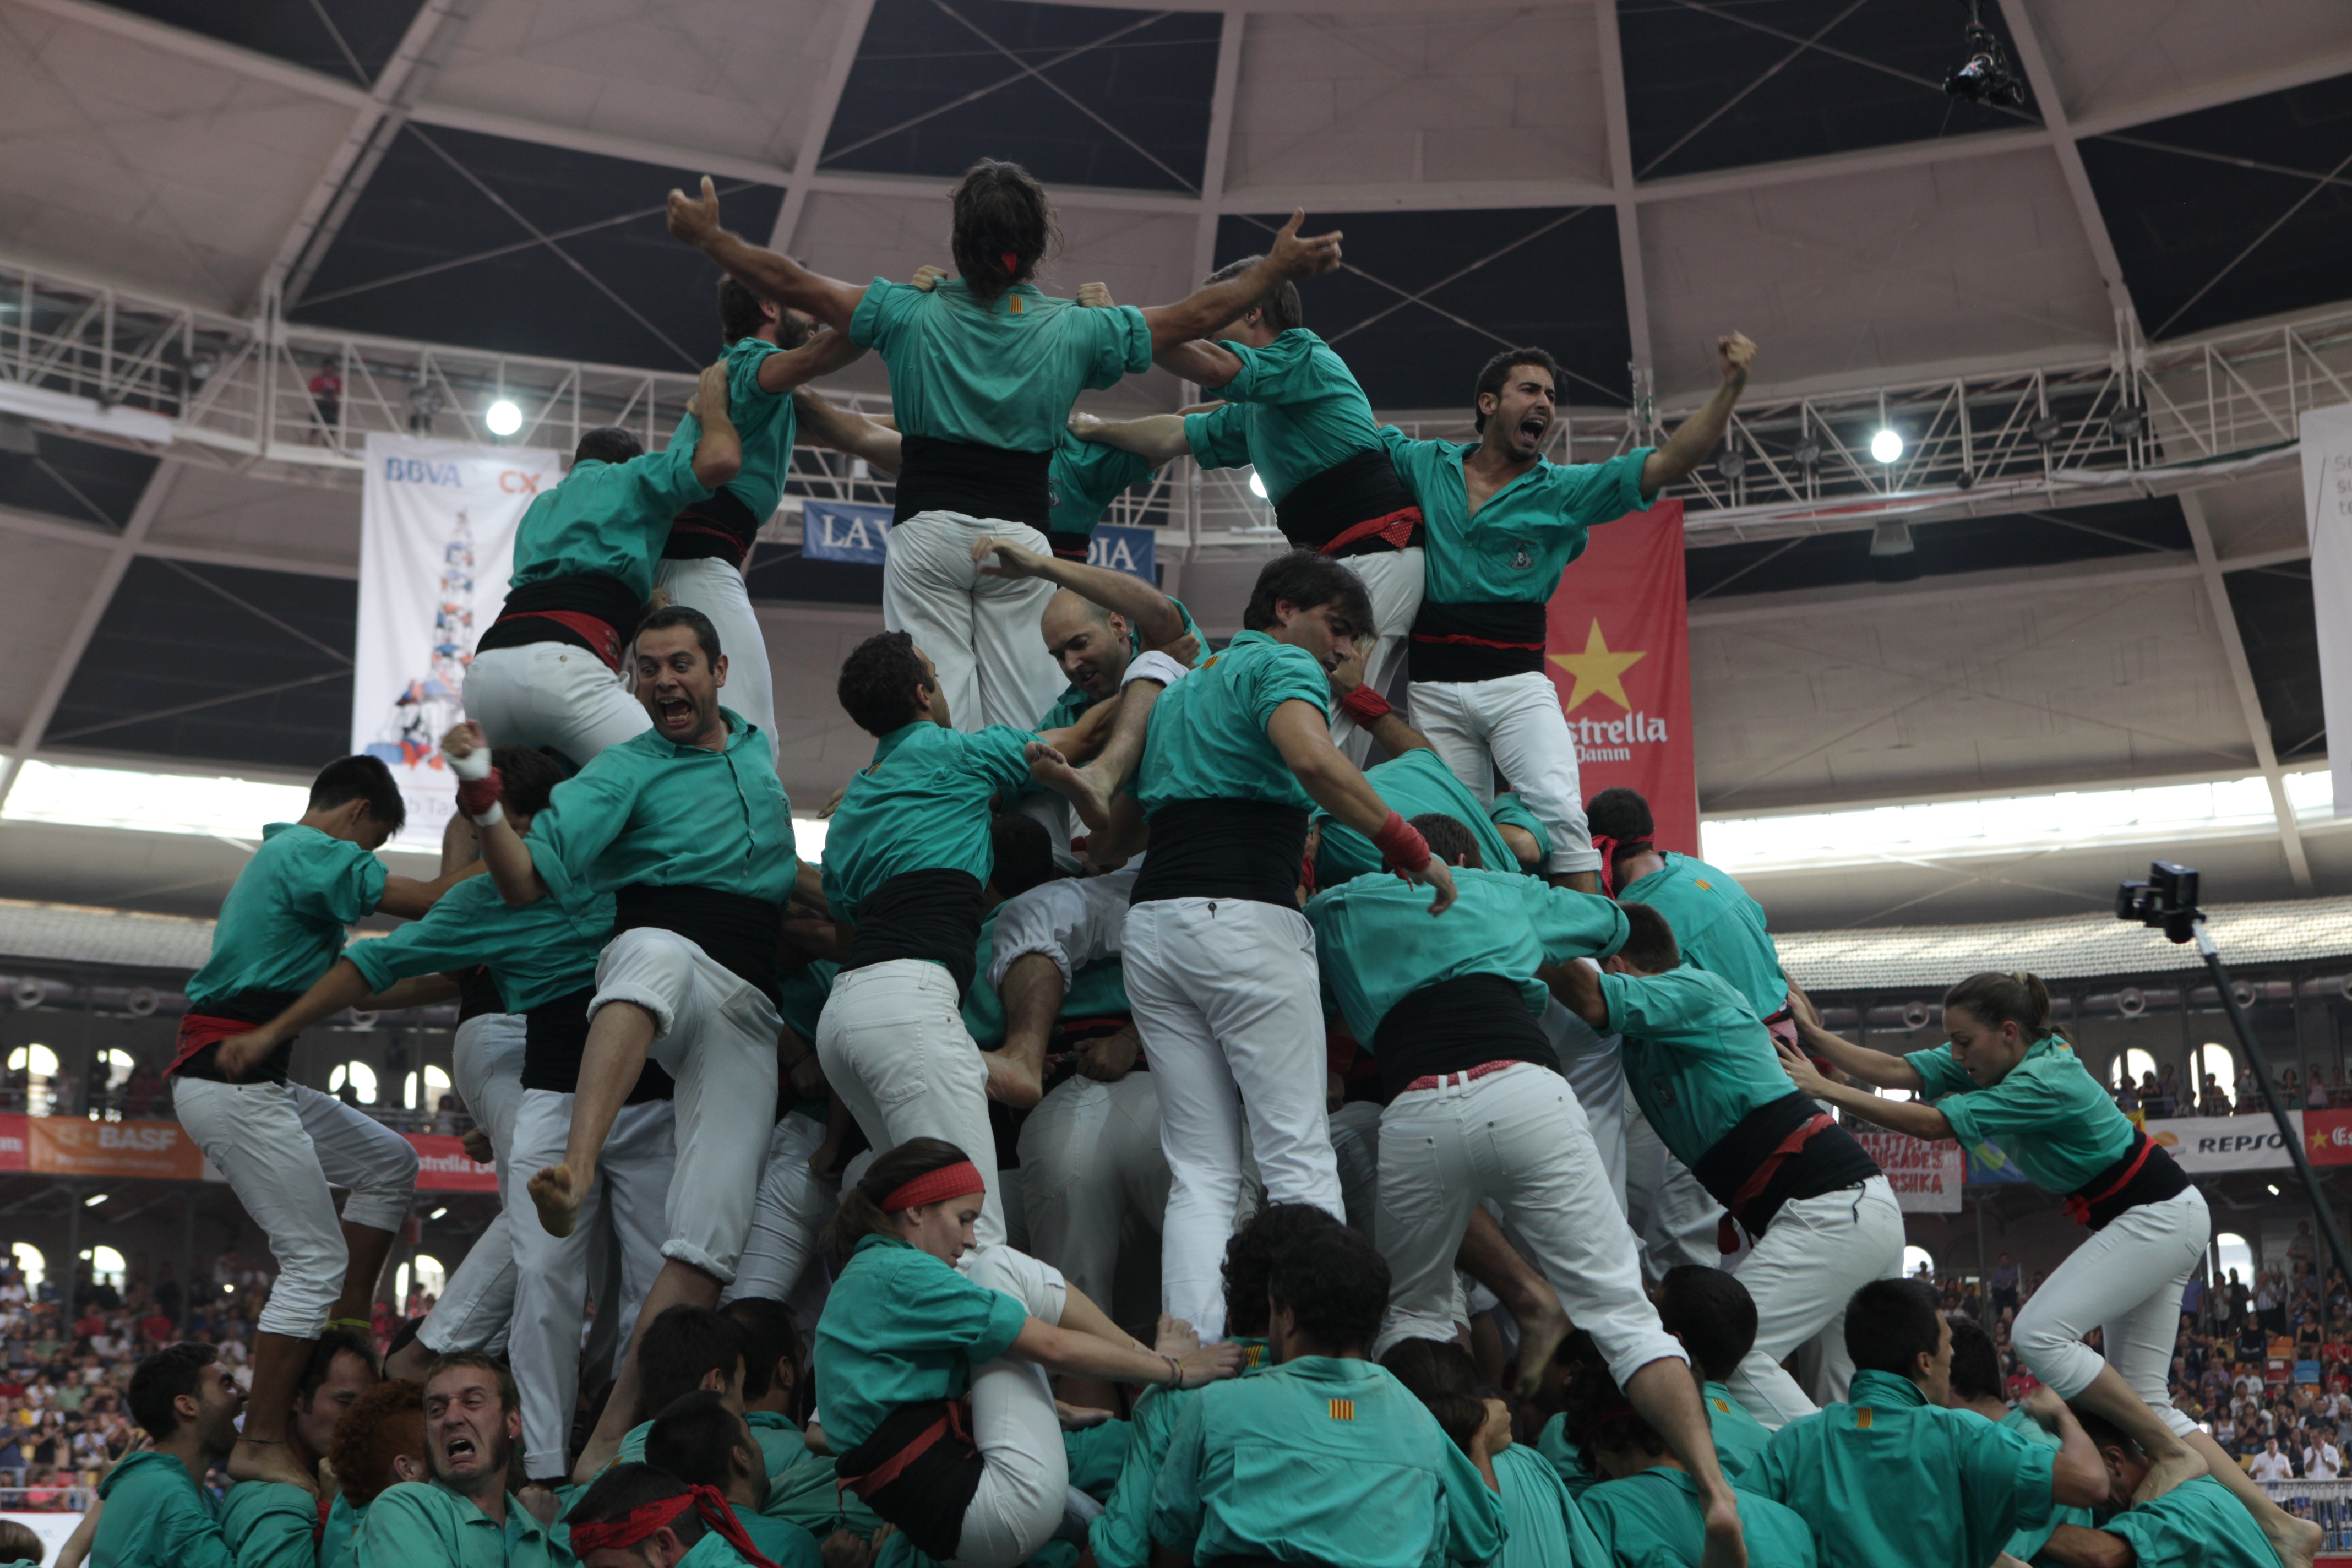 The Castellers de Vilafranca in the 2016 edition of the Tarragona Human Tower Competition (by Violeta Gomà)